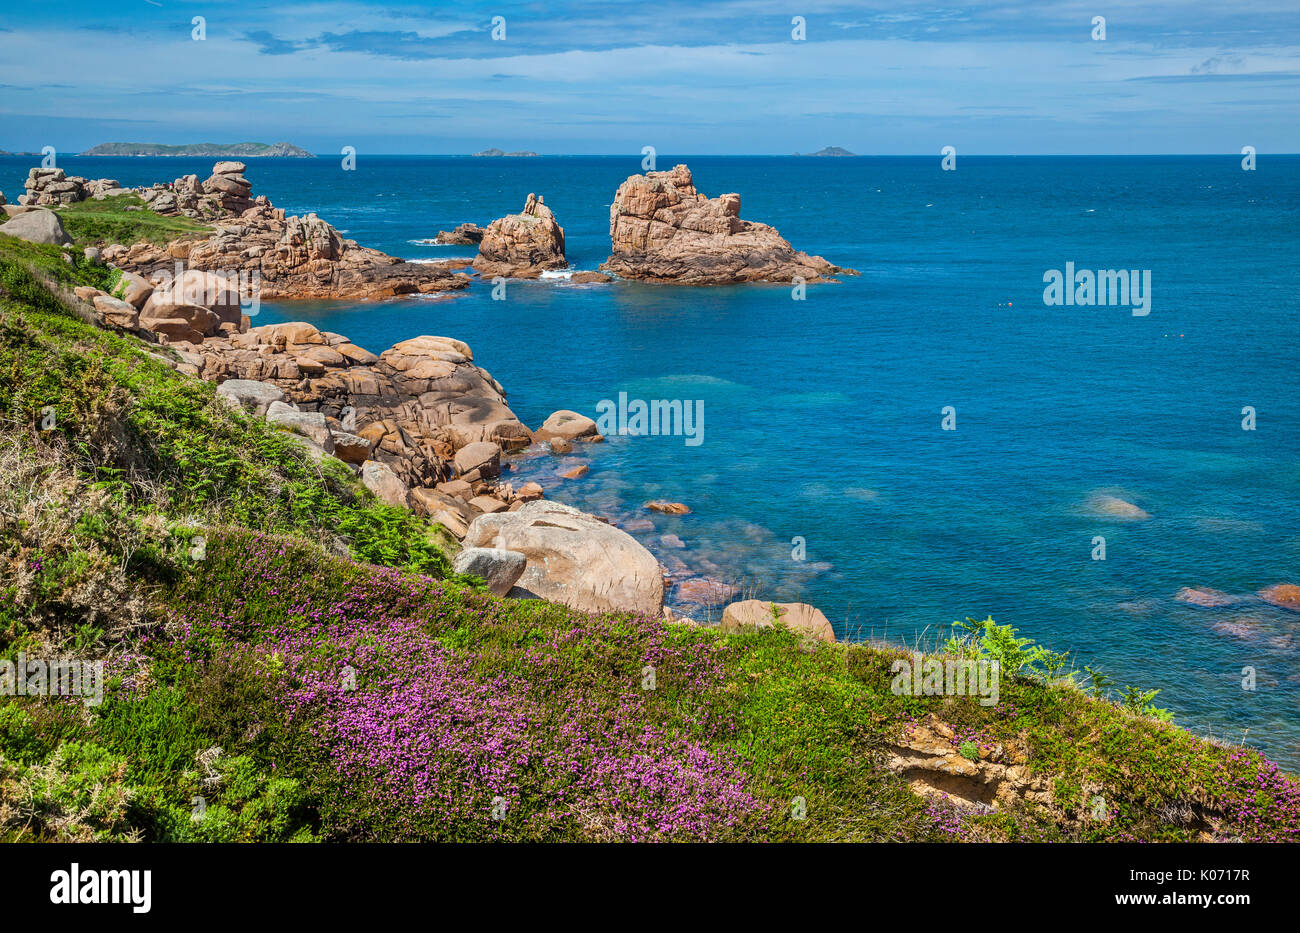 France, Brittany, Cotes d'Armor department, view of the Cote de Granit Rose (Pink granite coast) at Ploumanac'h from the Sentier des Douaniers (old cu Stock Photo